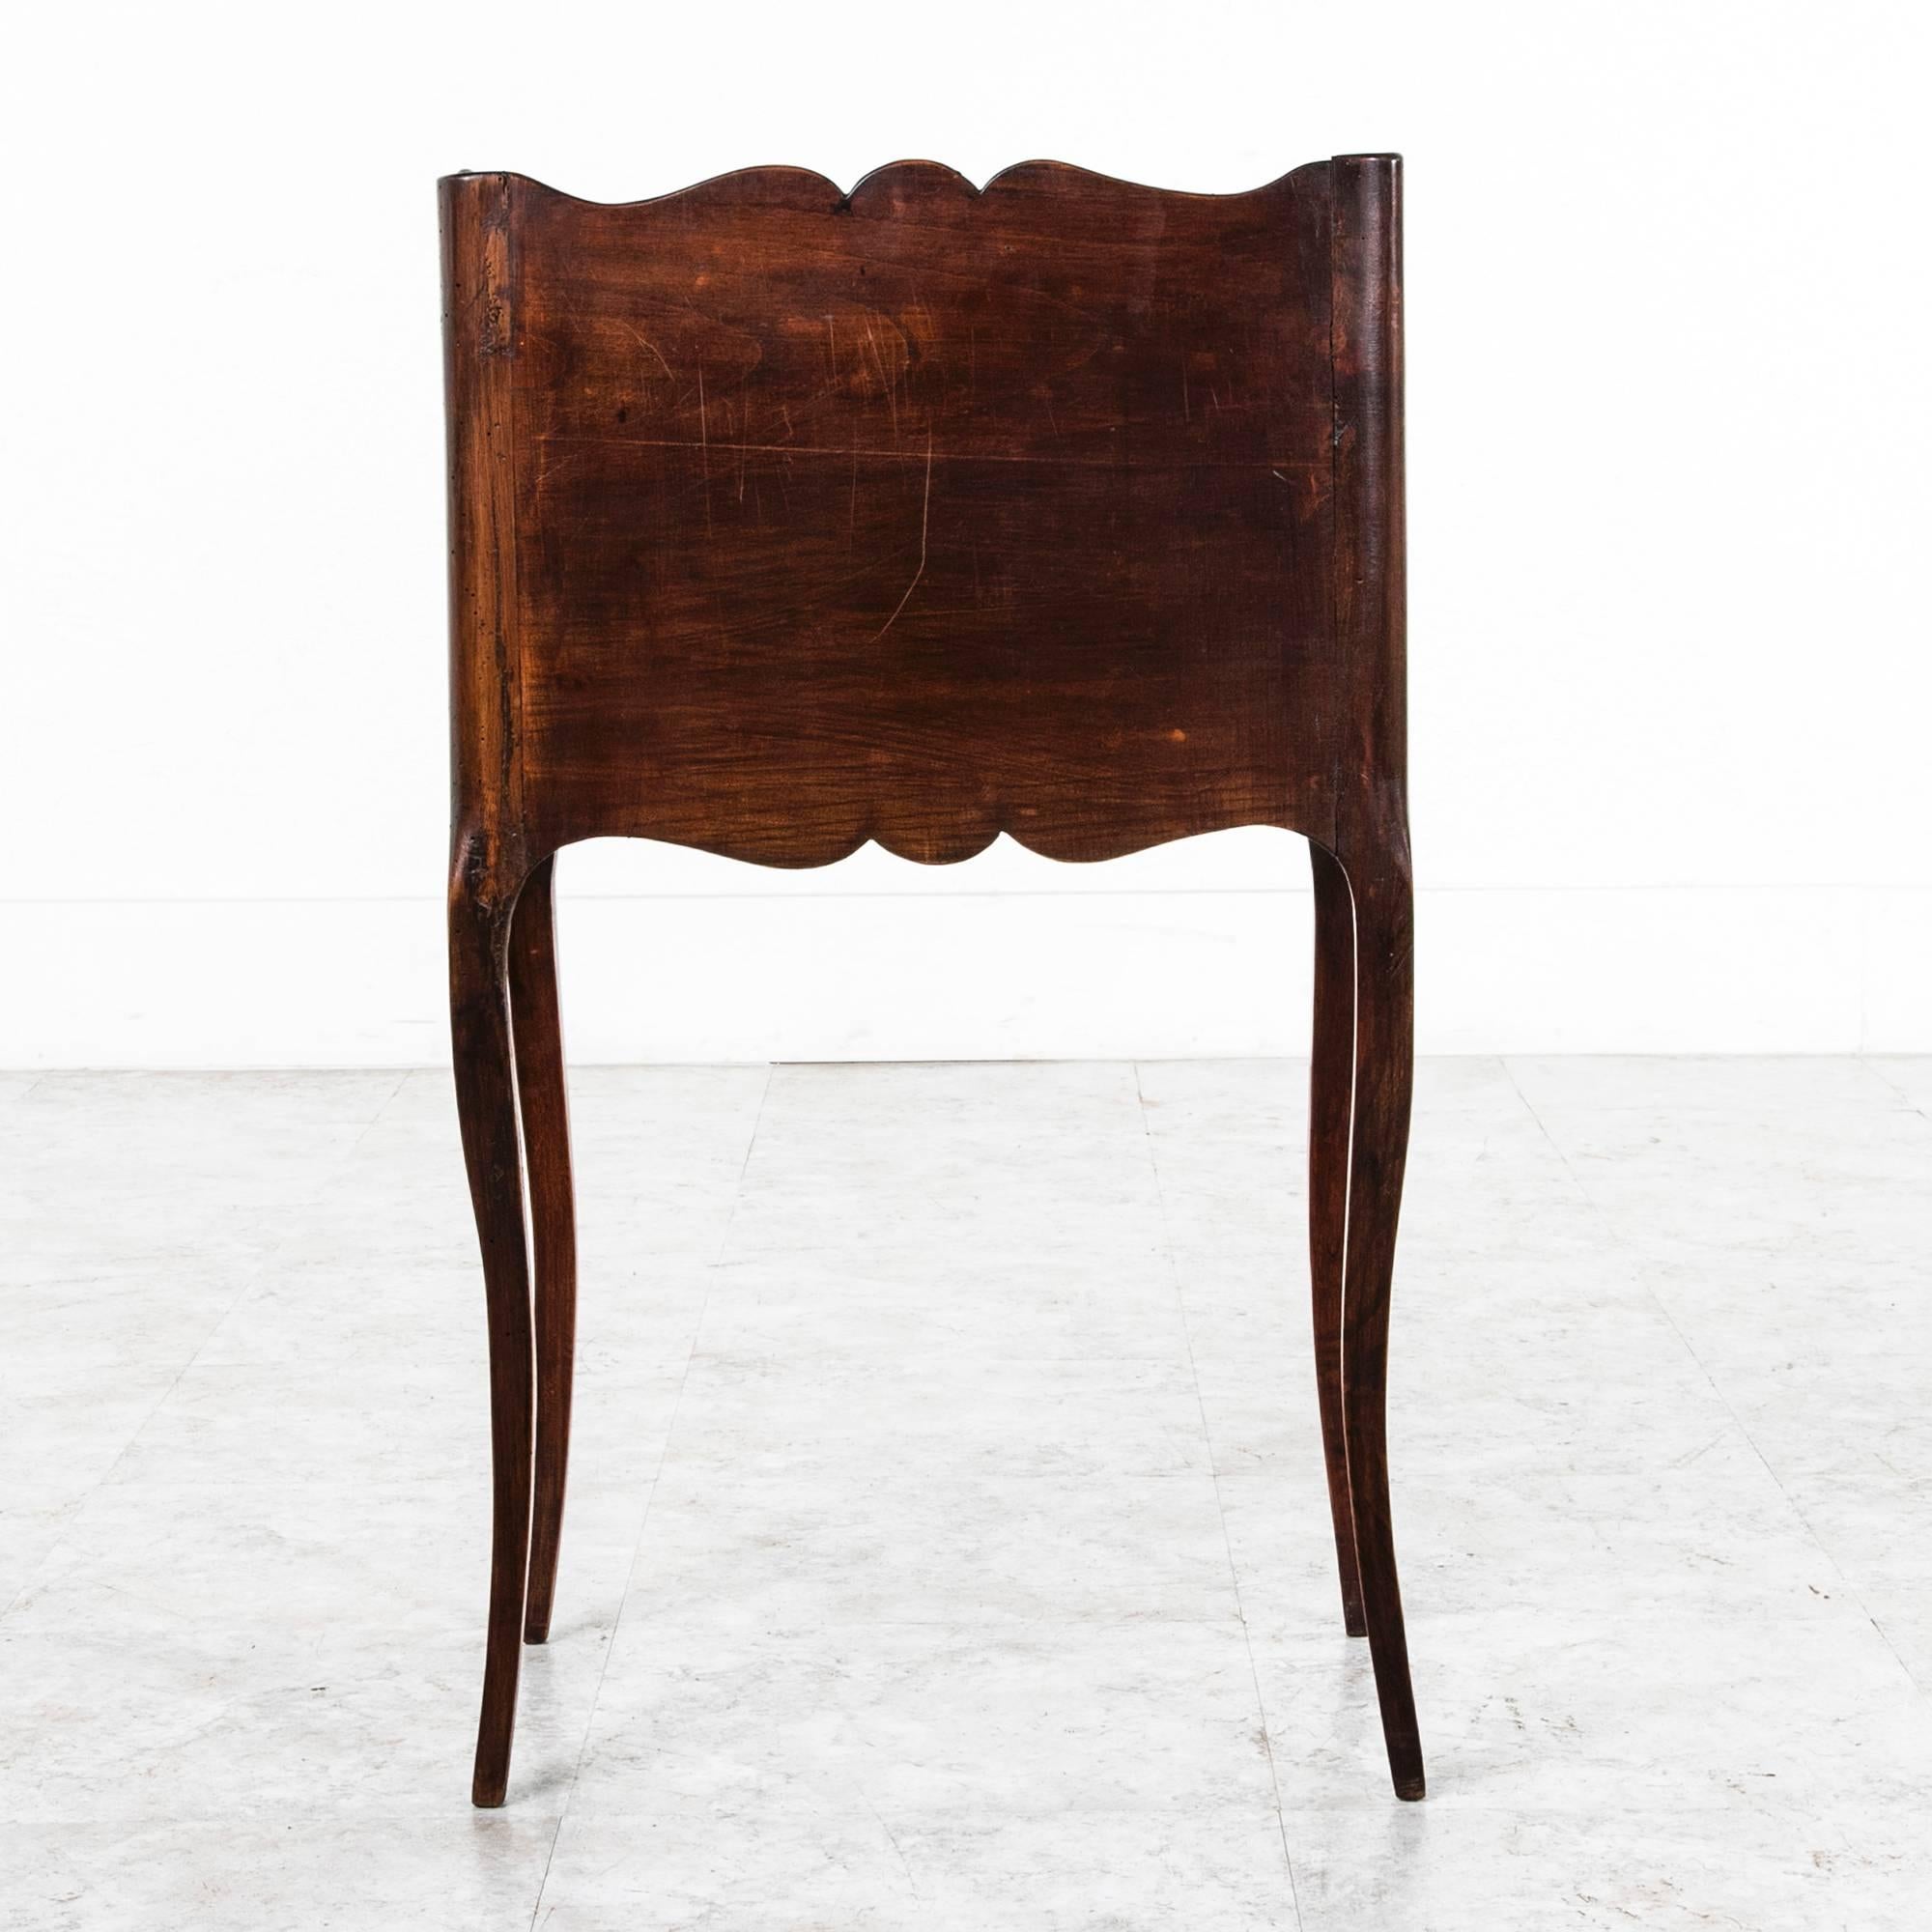 Early 20th Century Antique French Hand-Carved Walnut Nighstand with Slim Cabriole Legs